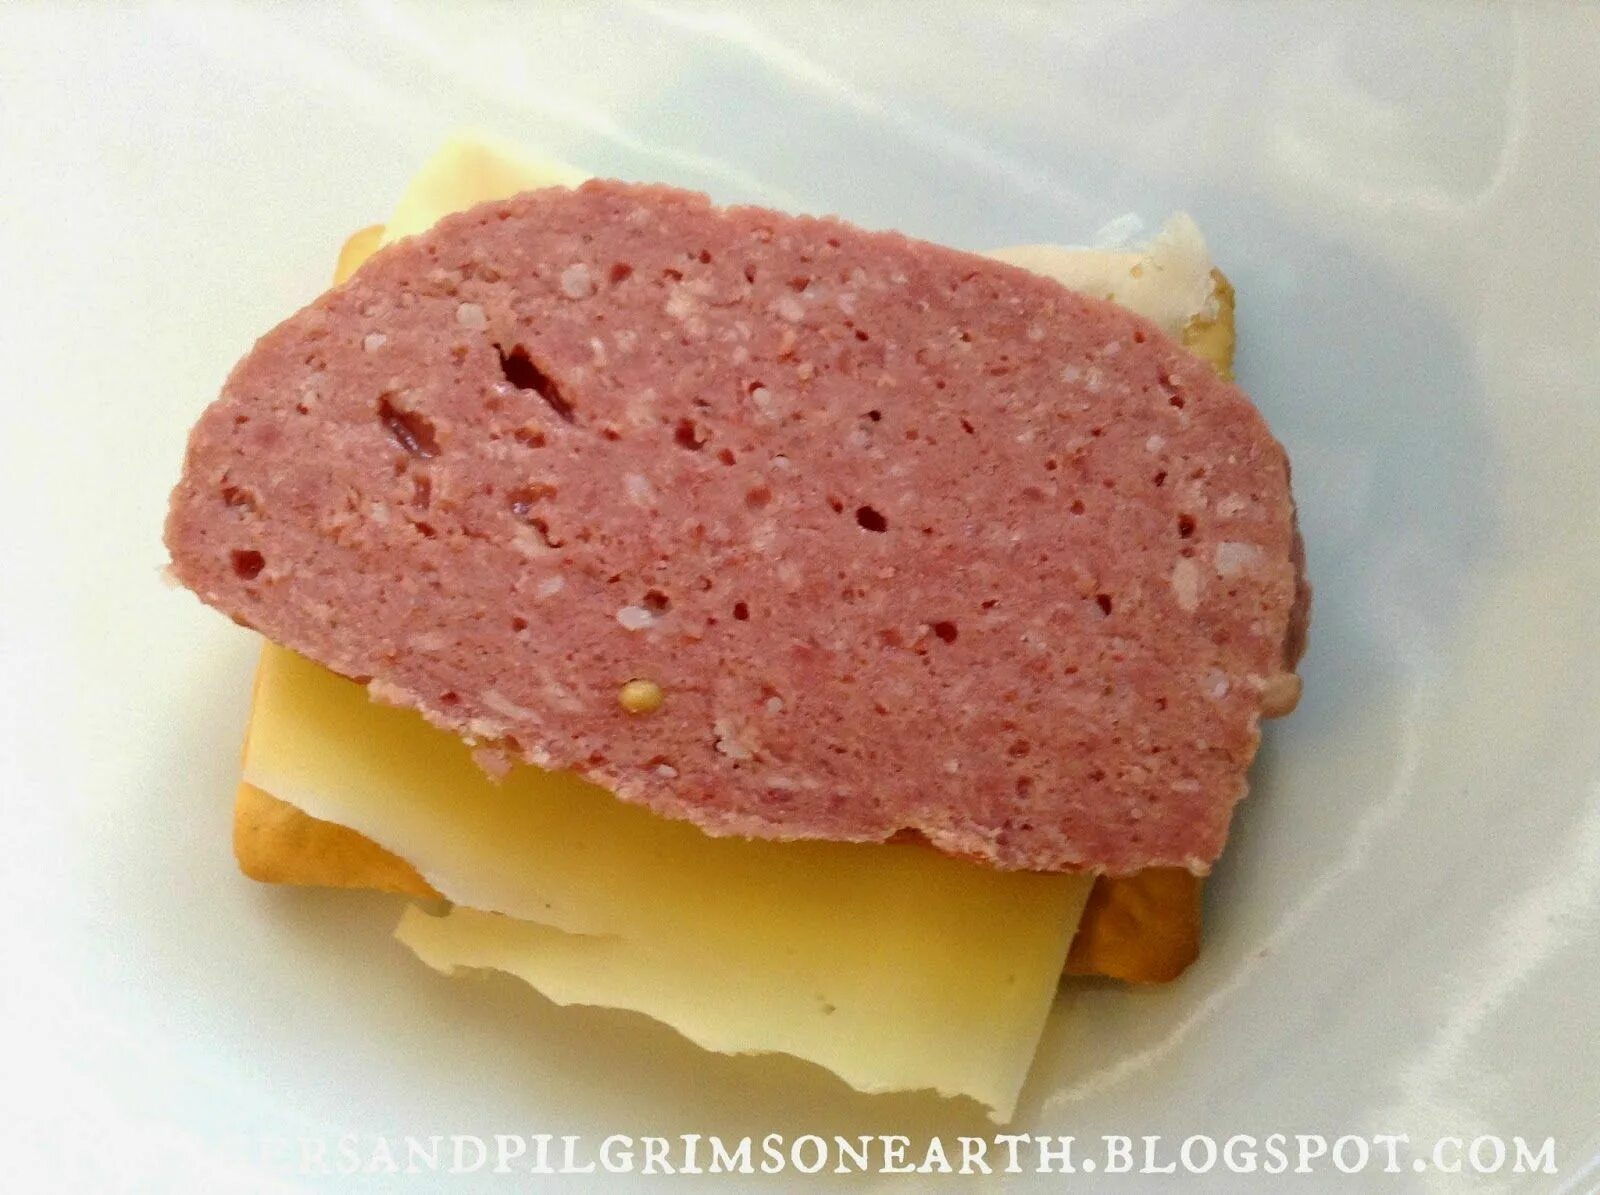 They like meat. Luncheon meat консервы. Luncheon meat рецепт. Luncheon meat консервы ingredients. Luncheon meat консервы ingredients list.